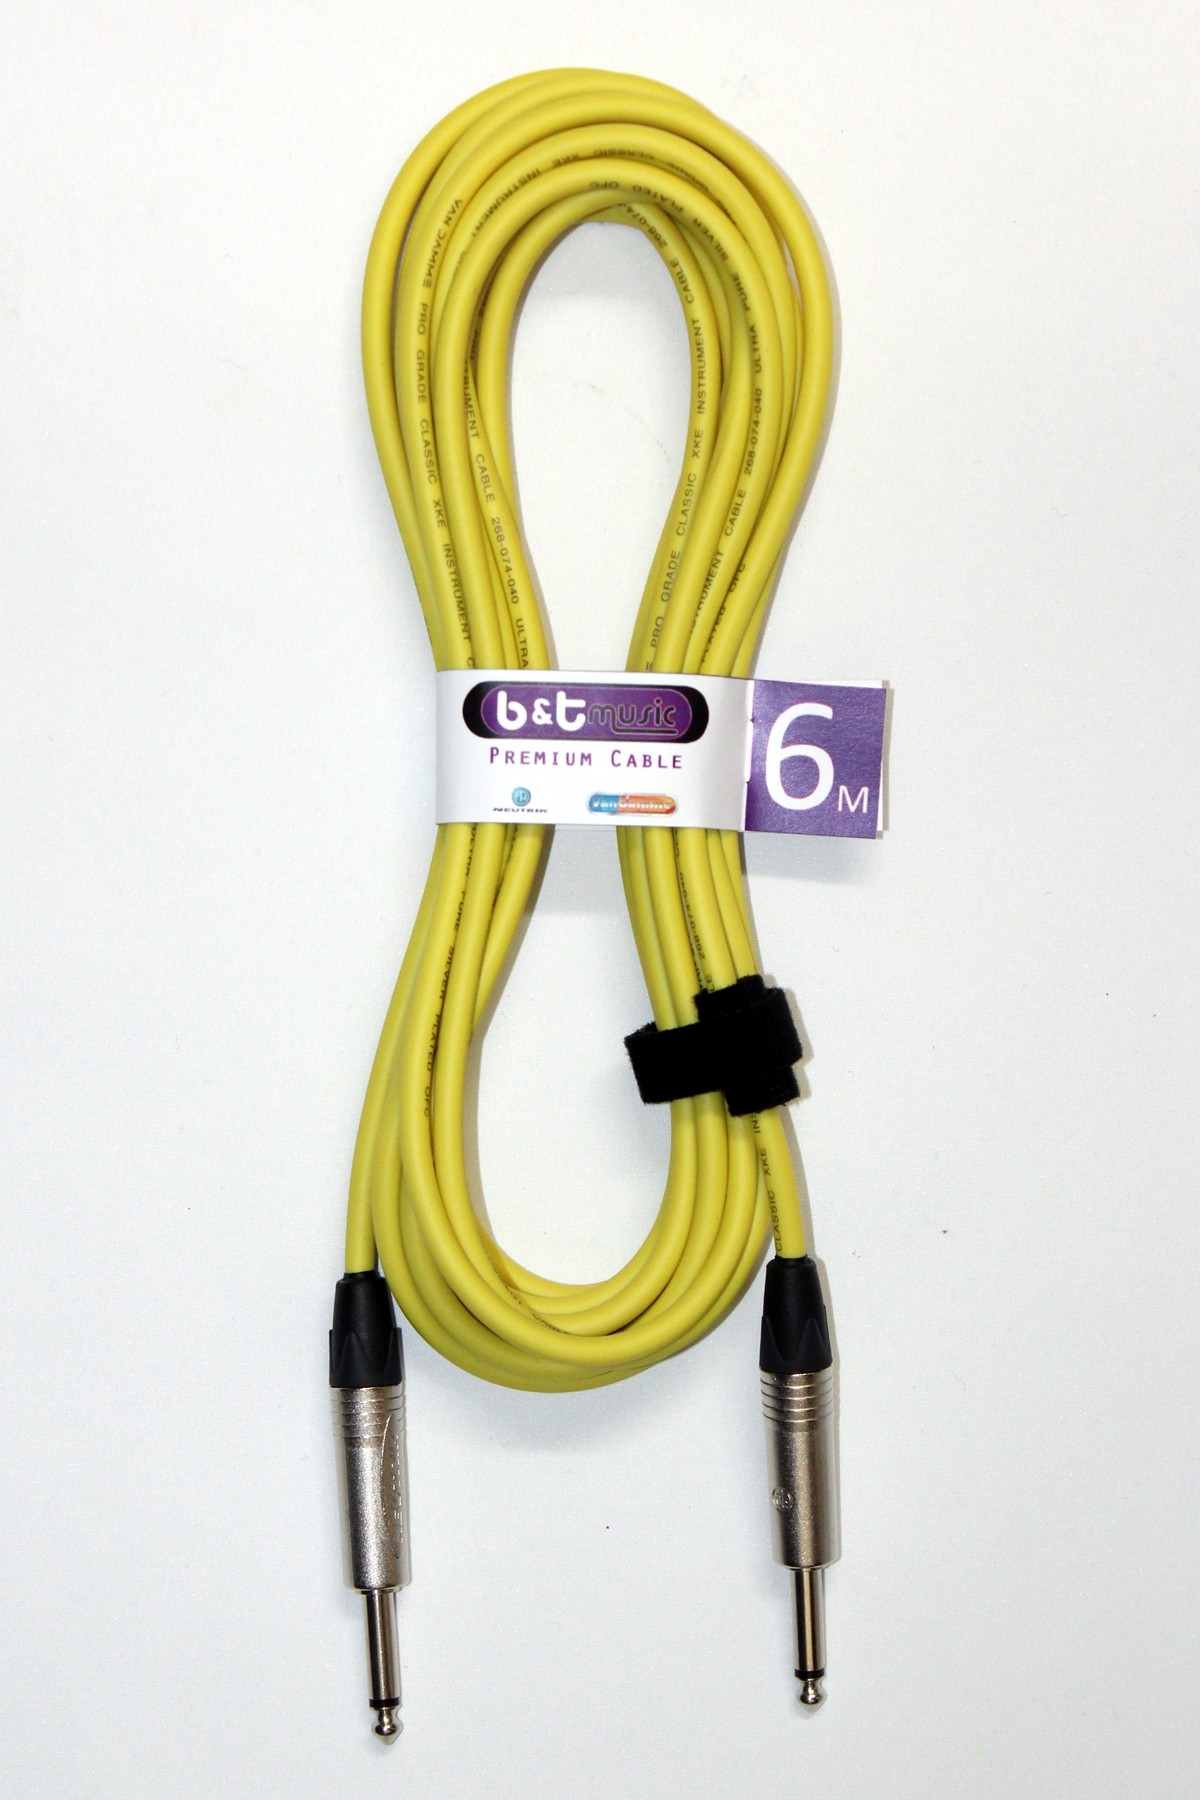 B&T Music Premium Cable 6m Jack To Jack - Yellow